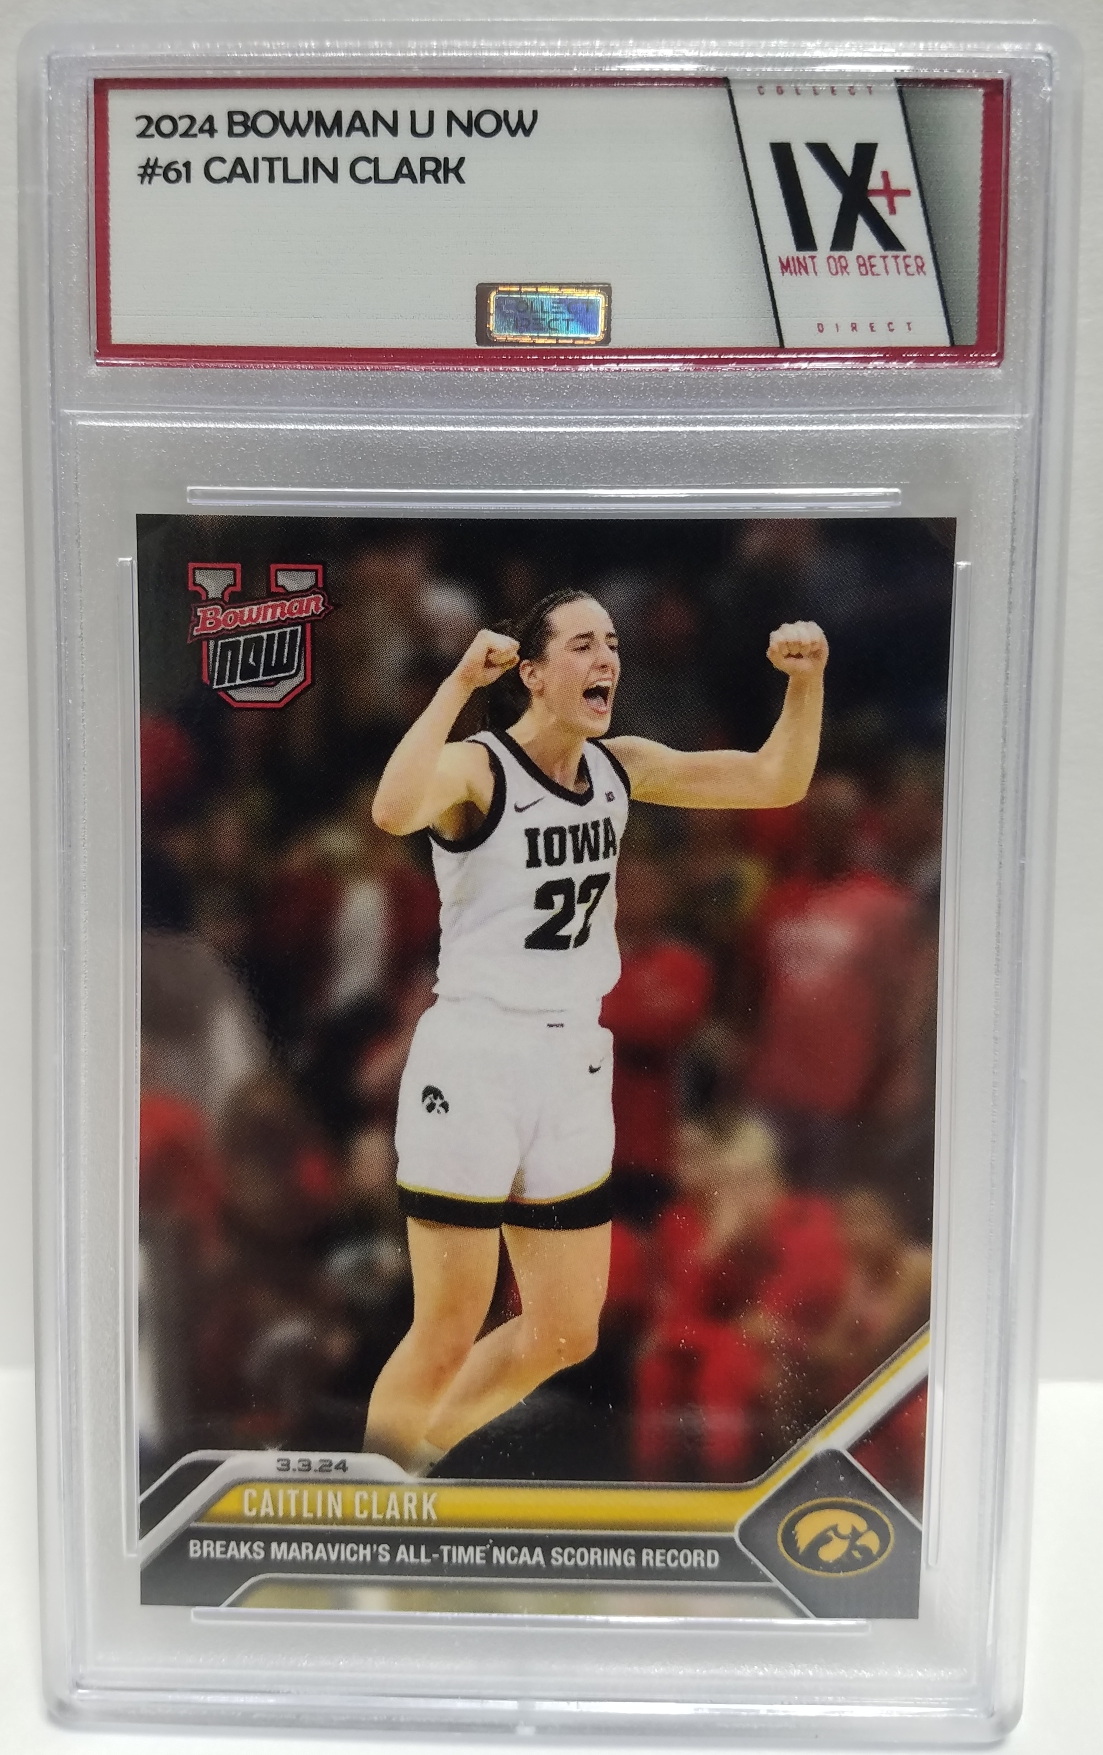 Caitlin Clark 2024 Bowman U Now #61 Collect Direct Graded Mint or Better Iowa Hawkeyes WNBA Indiana Fever #1 Pick